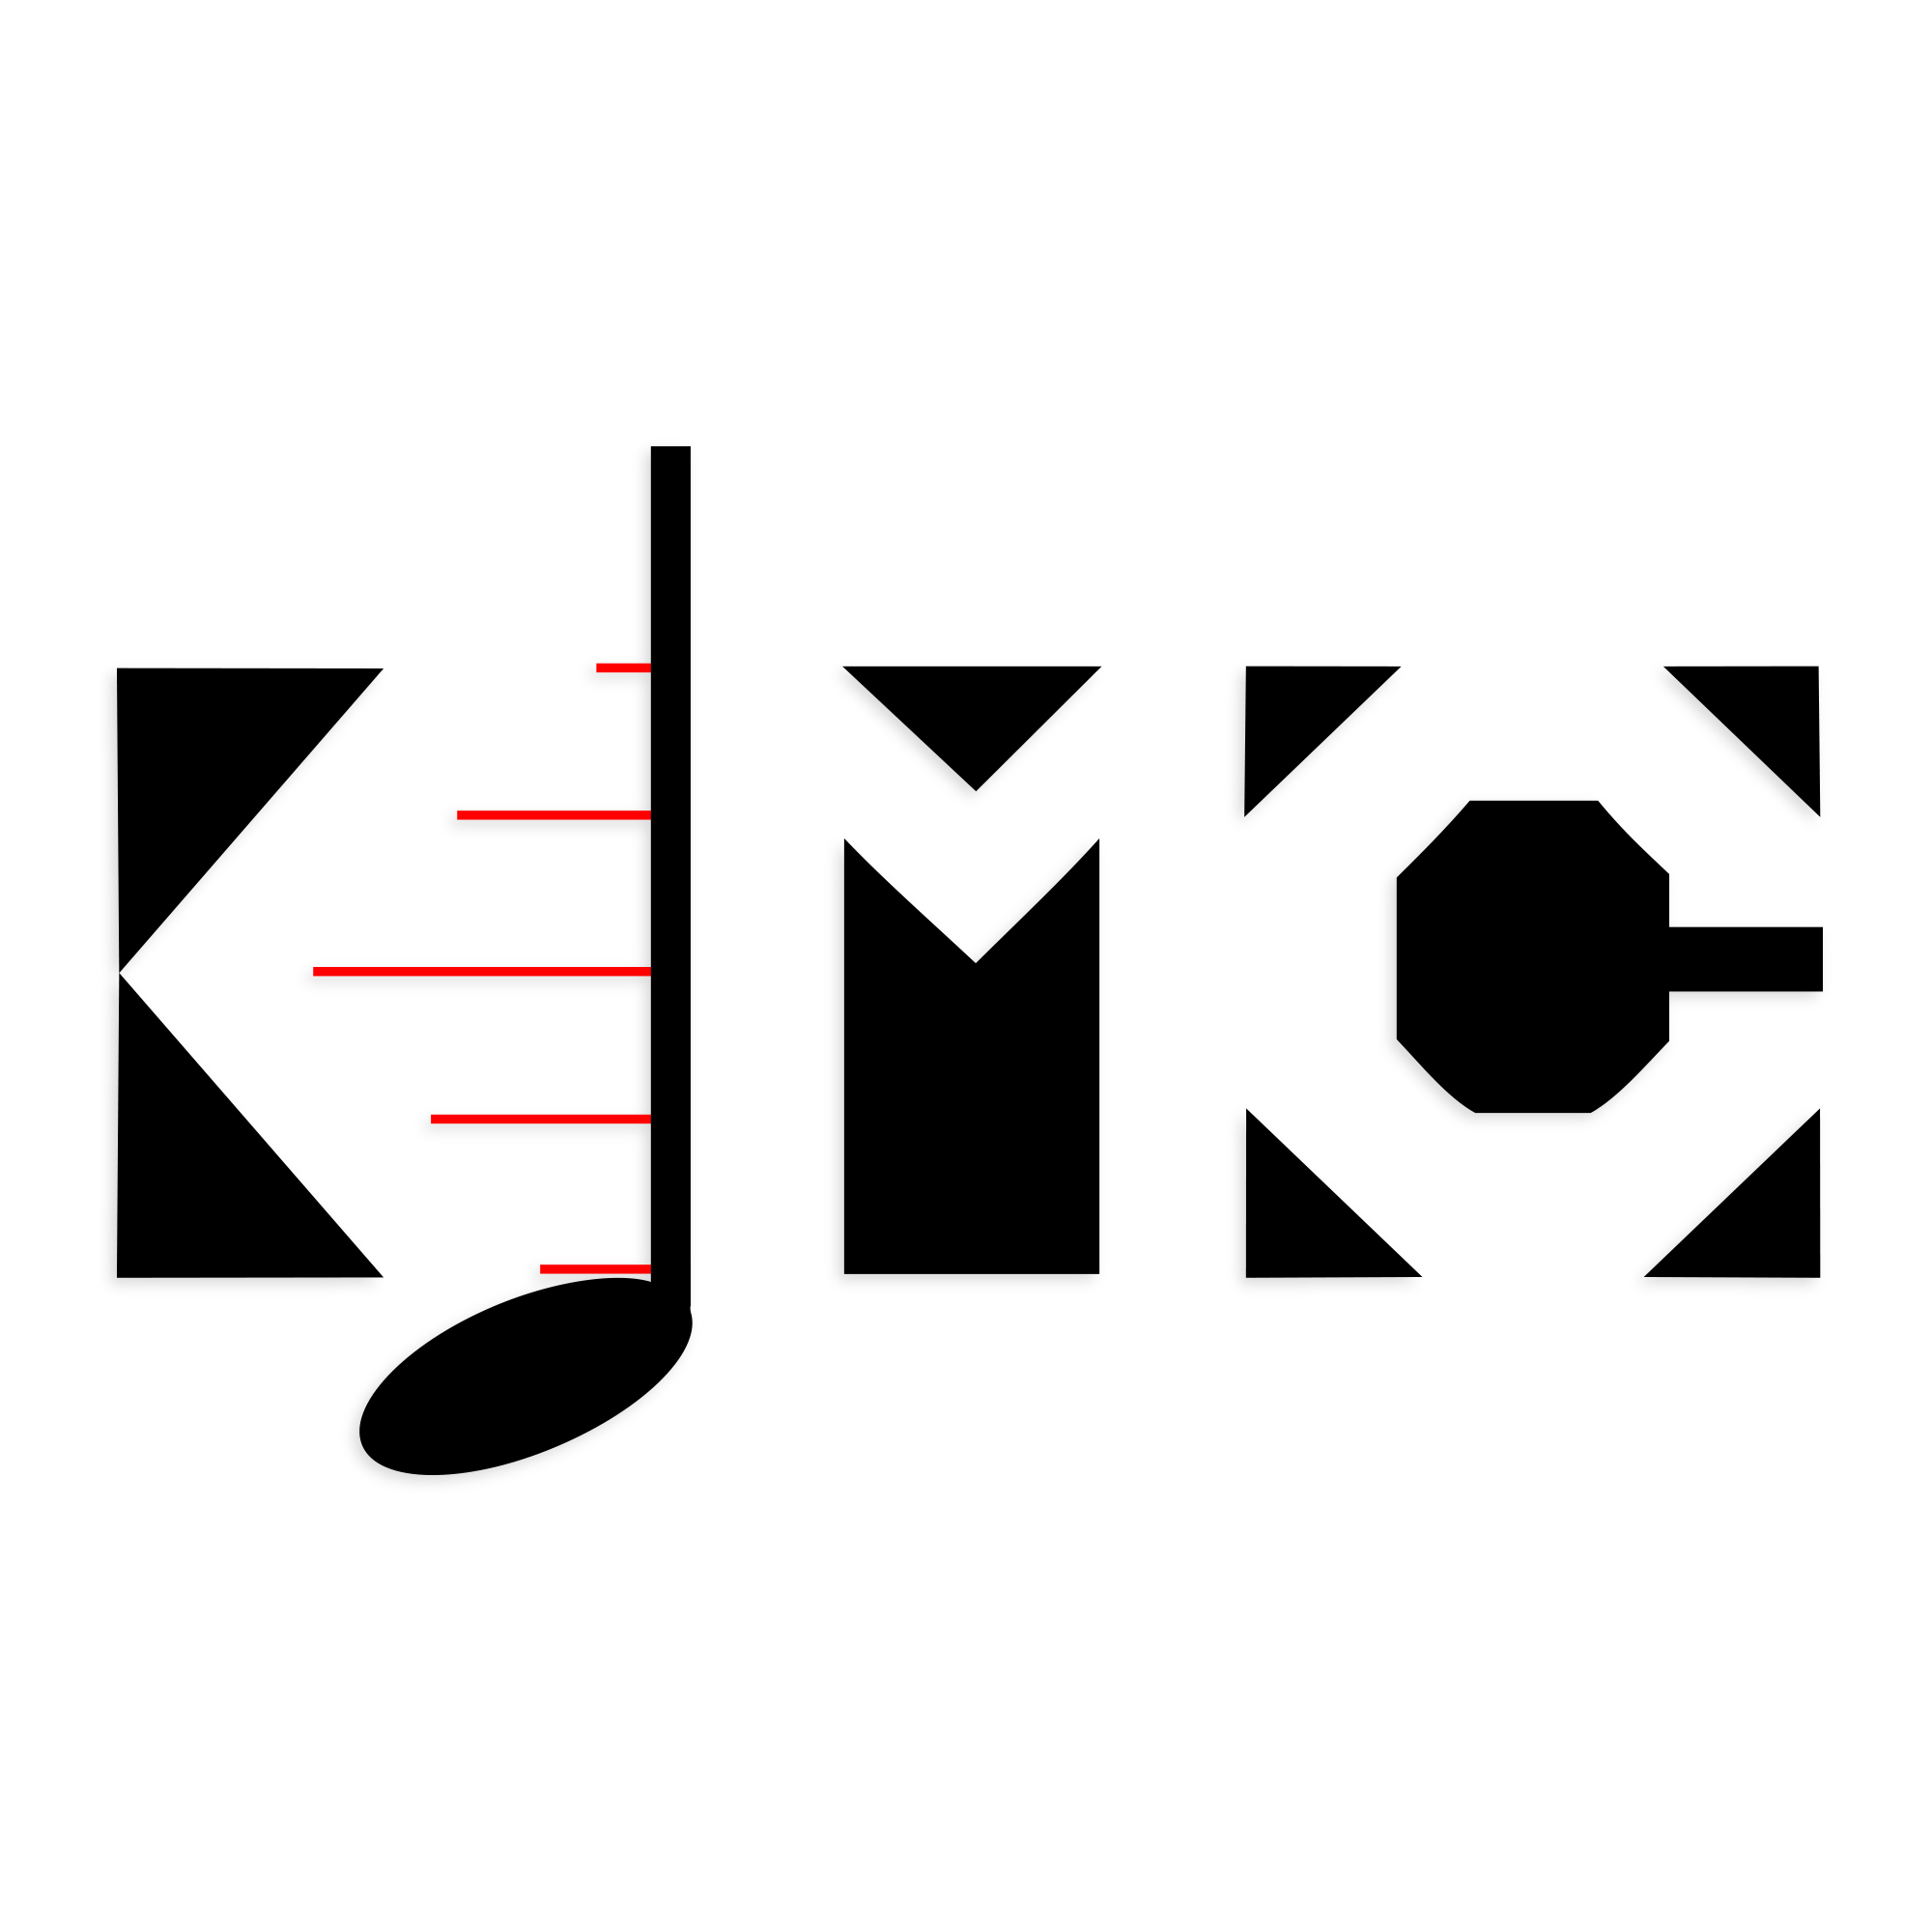 K. D. Music Consulting